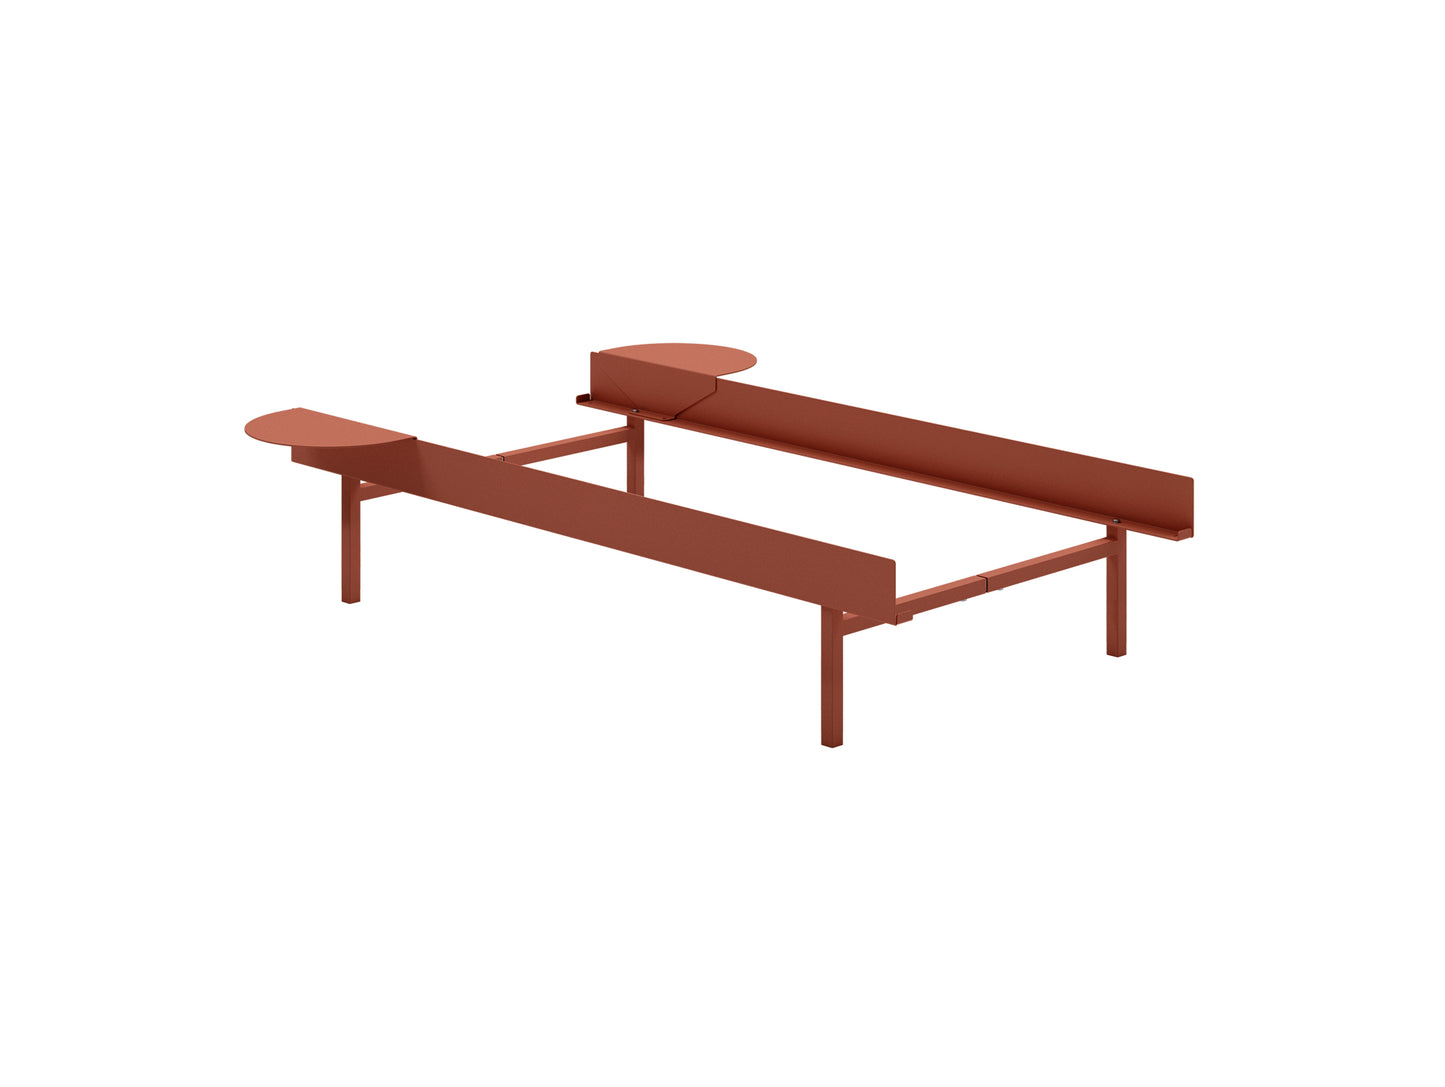 Bed 90 - 180 cm (High) by Moebe- Bed Frame / with NO SLATS / 2 Side Table / Terracotta